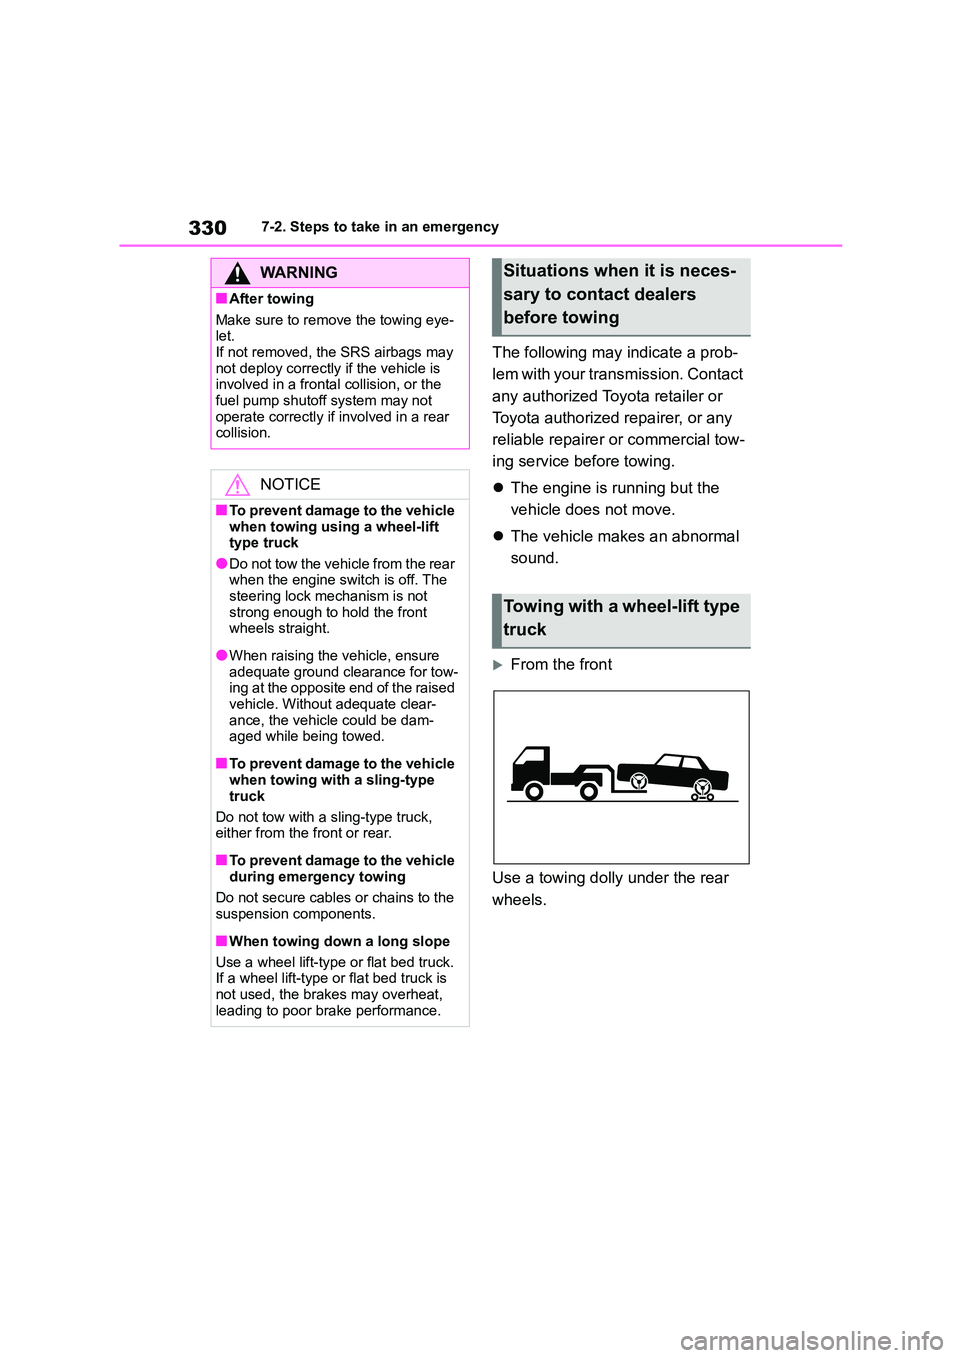 TOYOTA GR86 2022   (in English) User Guide 3307-2. Steps to take in an emergency
The following may indicate a prob- 
lem with your transmission. Contact 
any authorized Toyota retailer or 
Toyota authorized repairer, or any 
reliable repairer 